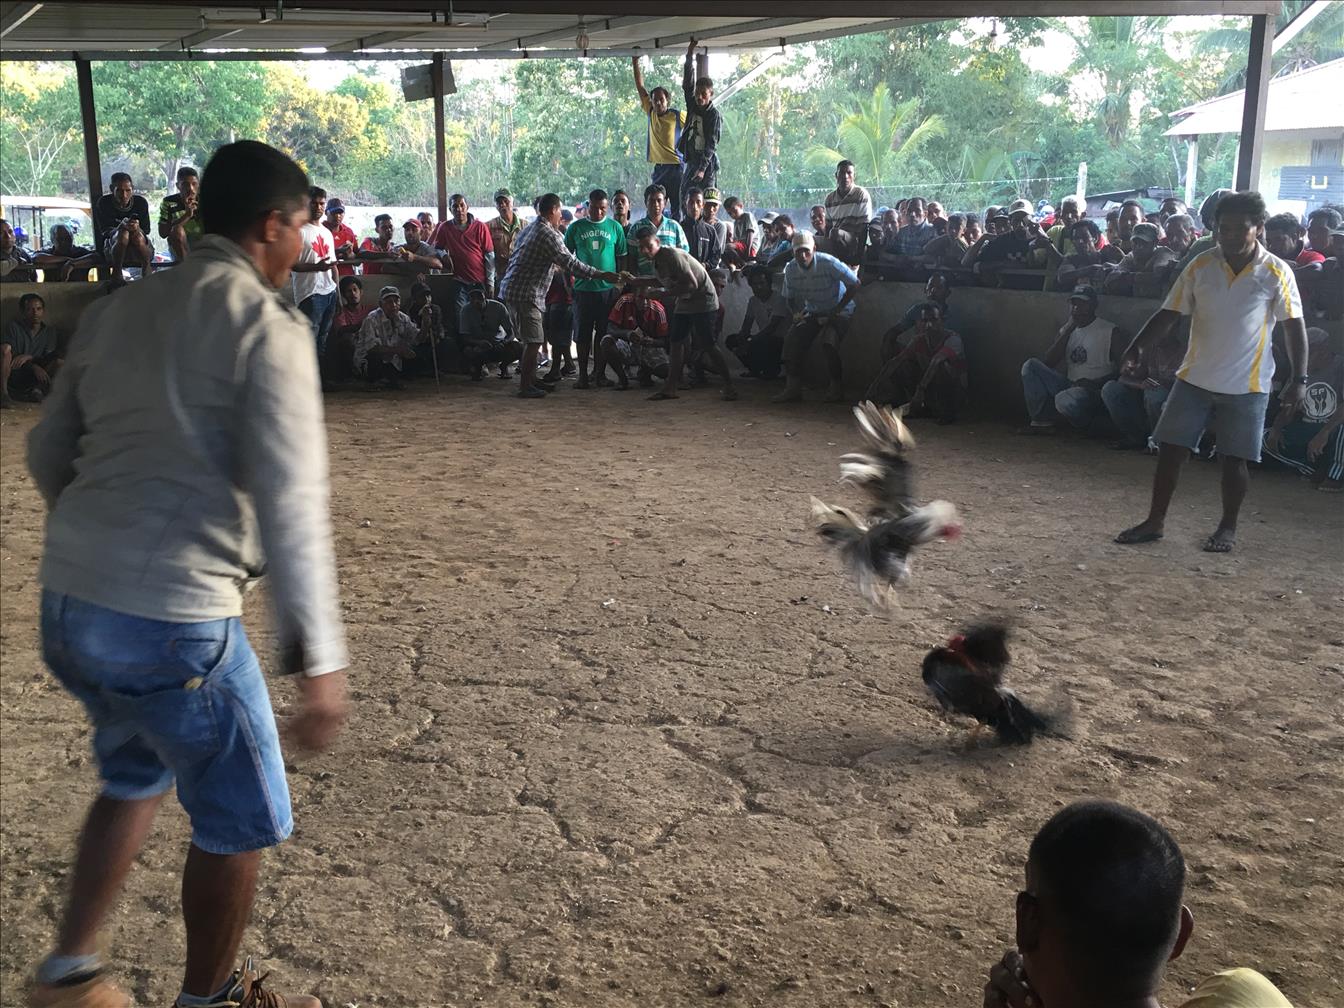 Cash For The Winner, The Loser For Dinner: Cockfighting In Timor Leste Is A Complicated Game